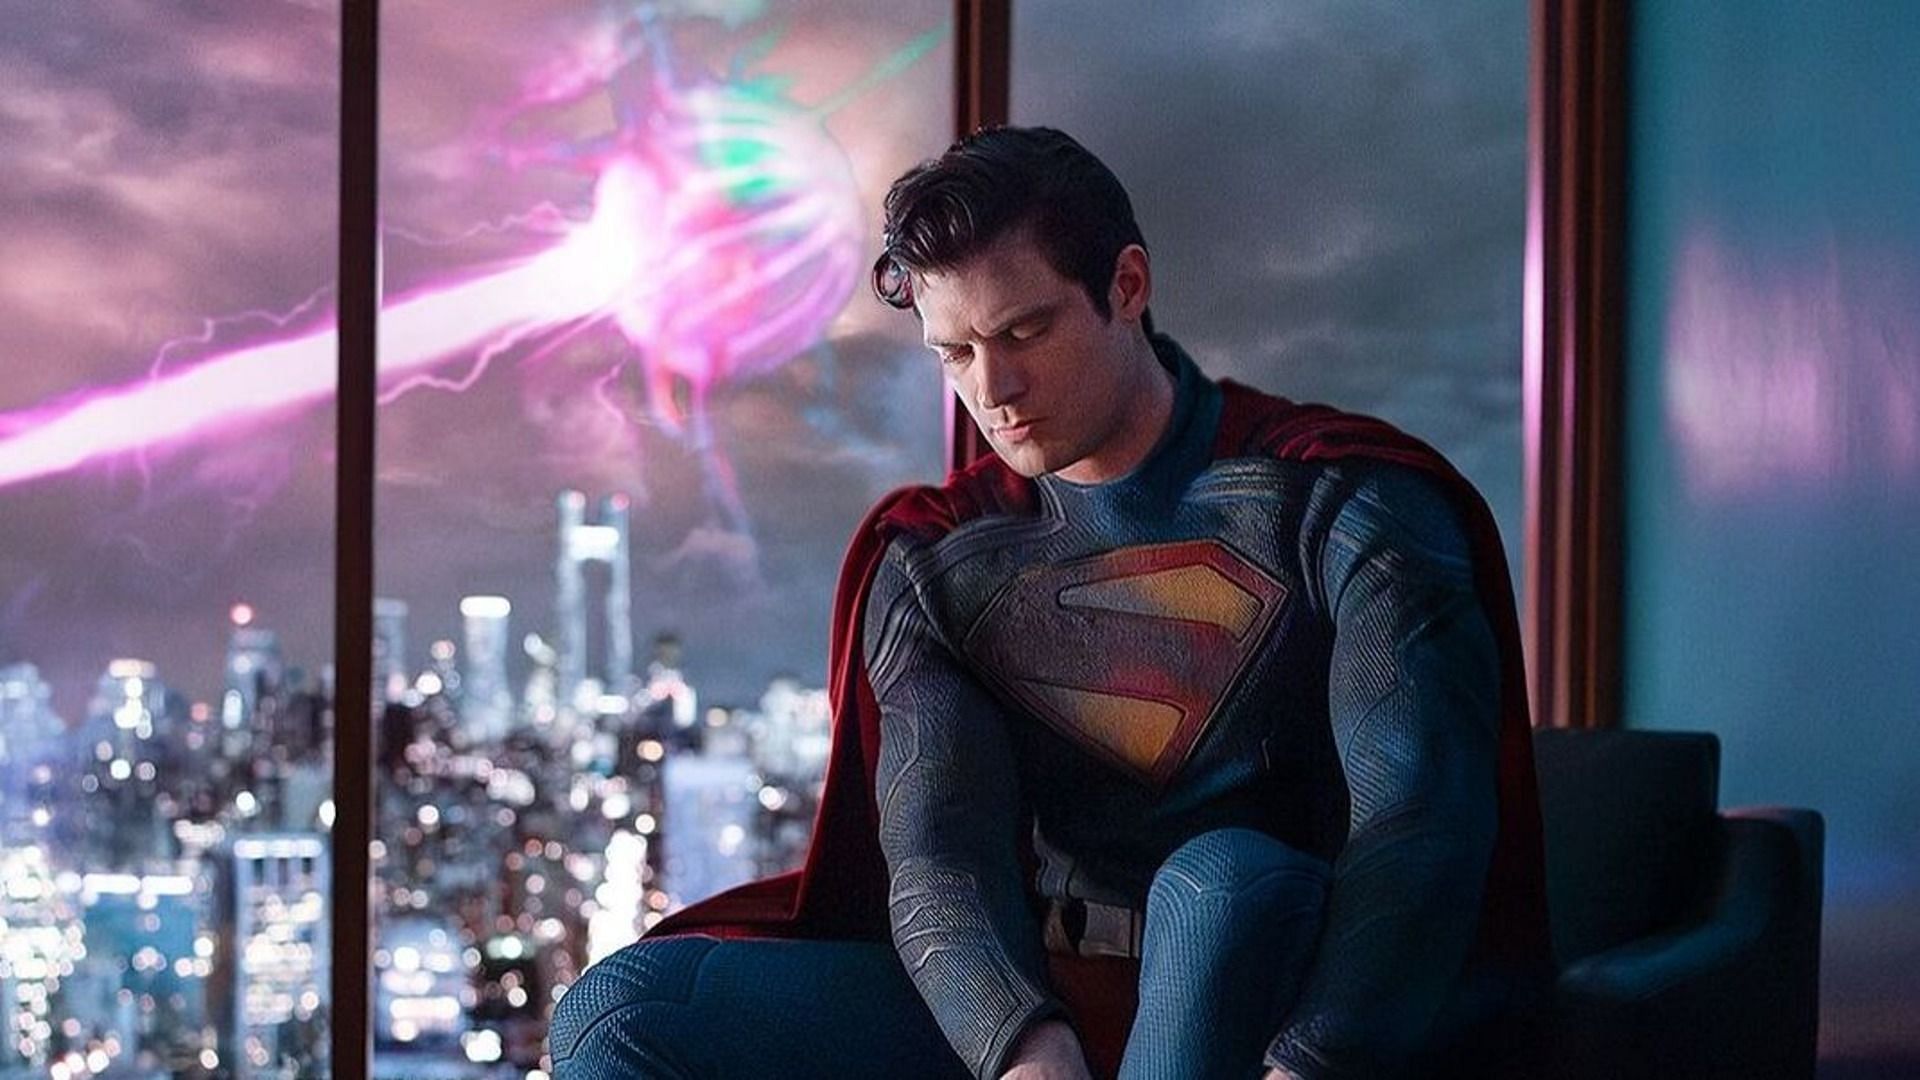 David Corenswet donning the new Superman outfit (Image by @jamesgunn/Instagram)